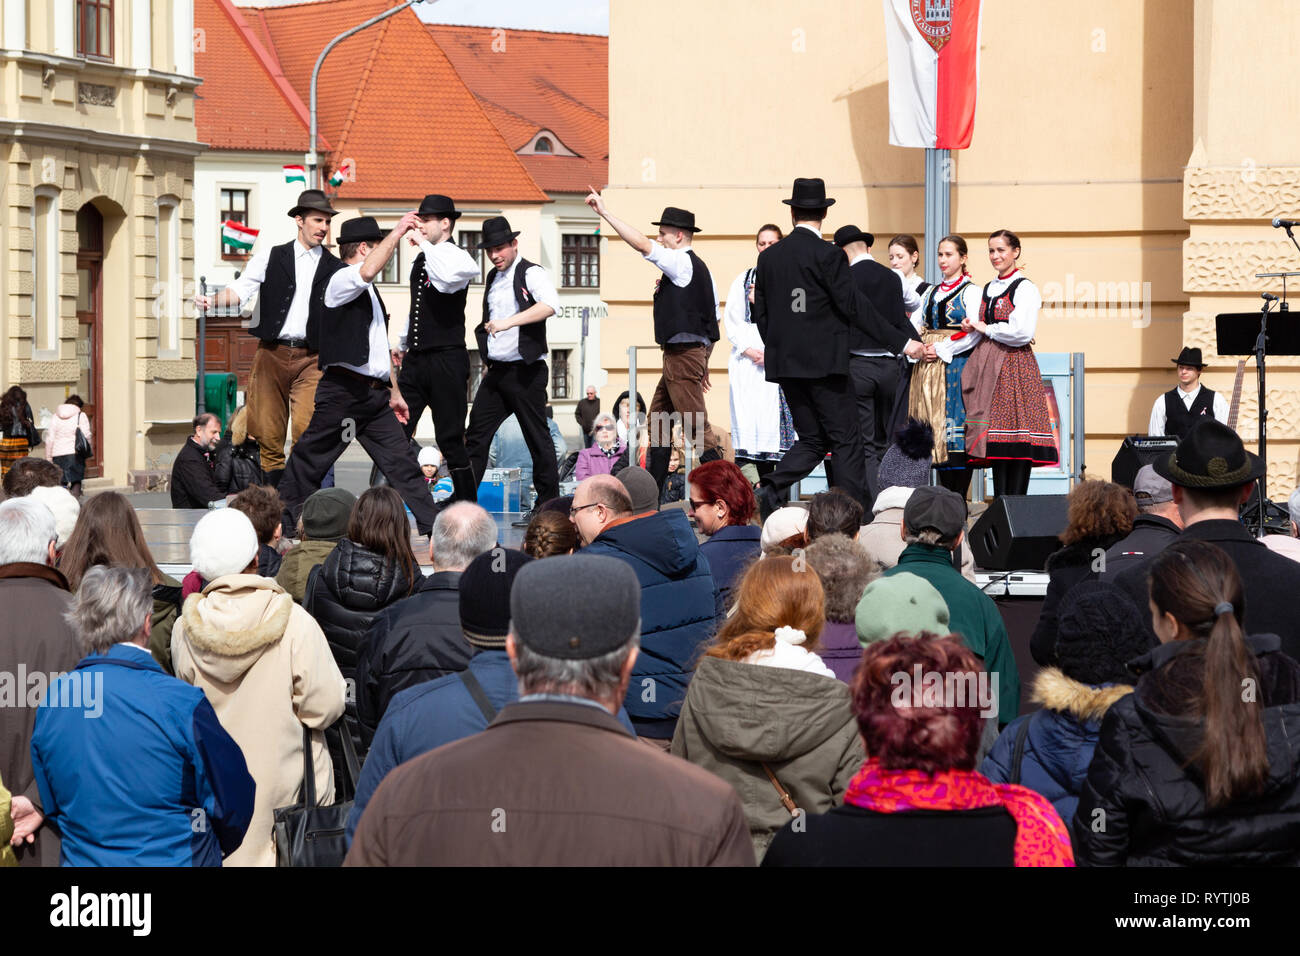 Sopron, Hungary. 15th Mar, 2019. Group of male folk dancers performs traditional Hungarian dances in circle on stage at Petőfi Square, Sopron, Hungary. Girls of the folk dance group cling together at the edge of the stage watching. Credit: Wahavi/Alamy Live News Stock Photo